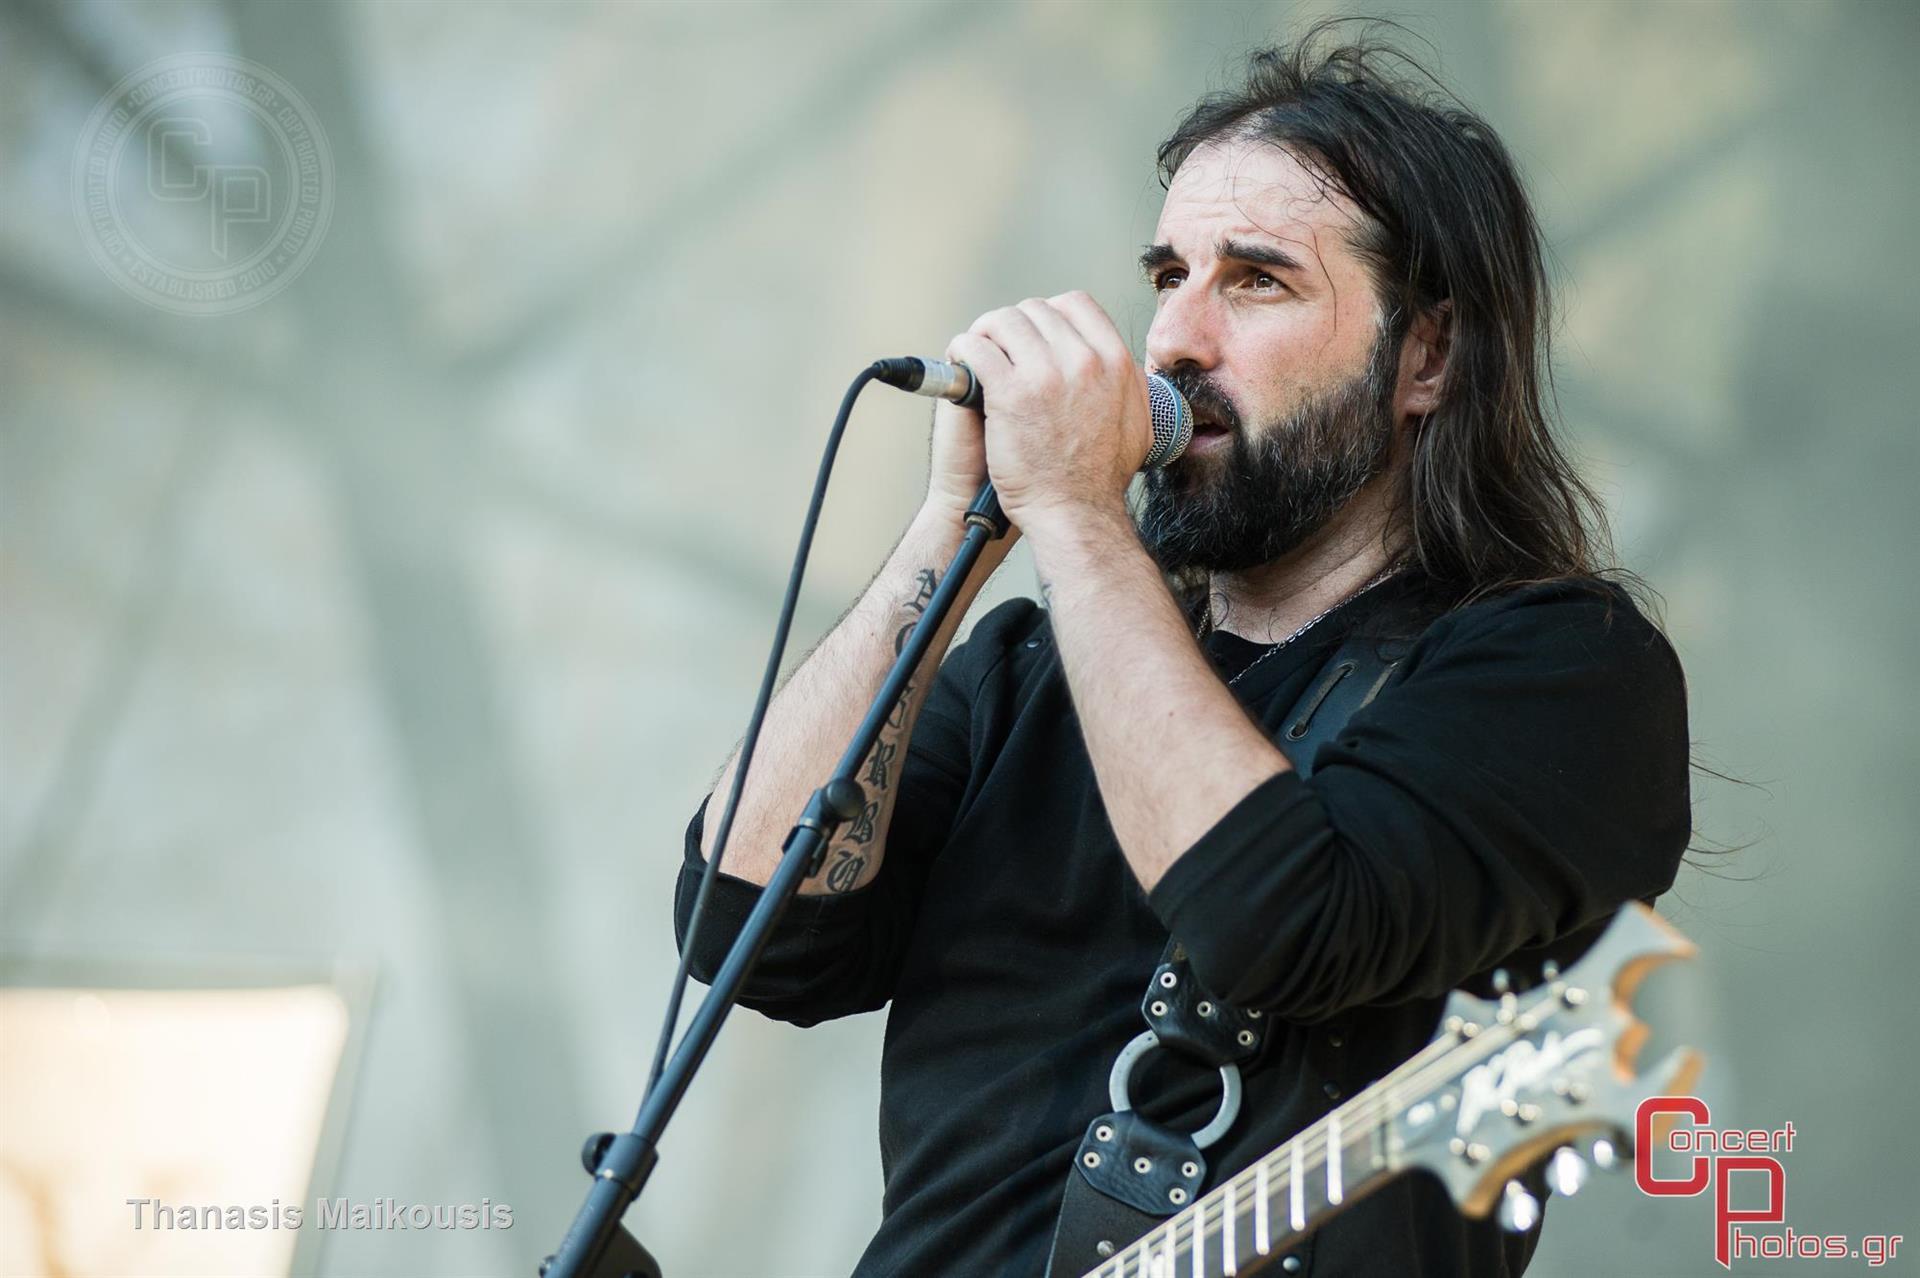 Rockwave 2015 - Day 3-Rockwave 2015 - Day 3 photographer: Thanasis Maikousis - ConcertPhotos - 20150704_1815_46